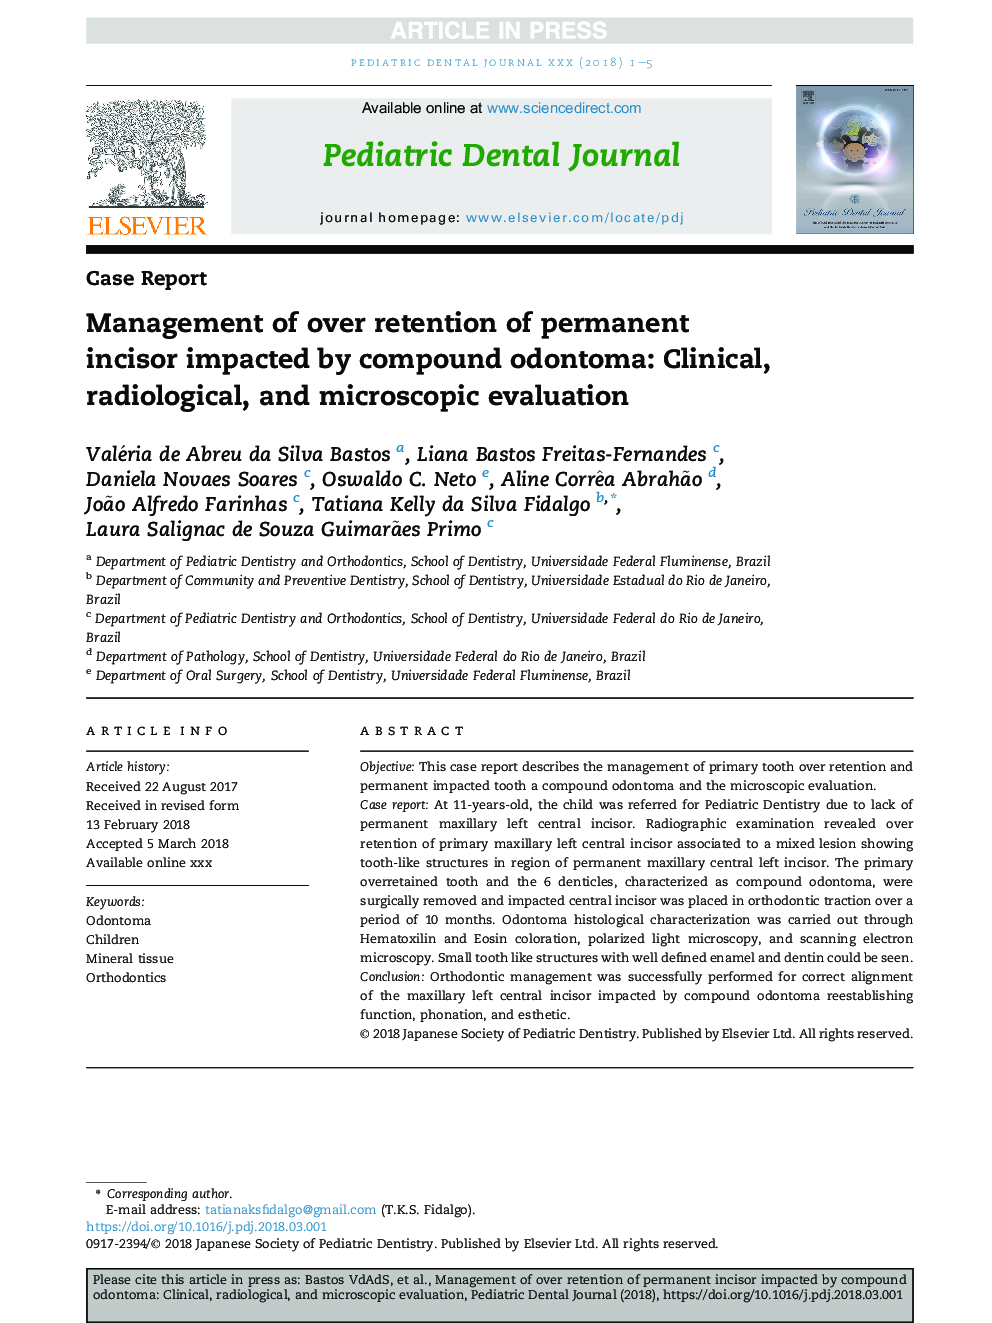 Management of over retention of permanent incisor impacted by compound odontoma: Clinical, radiological, and microscopic evaluation